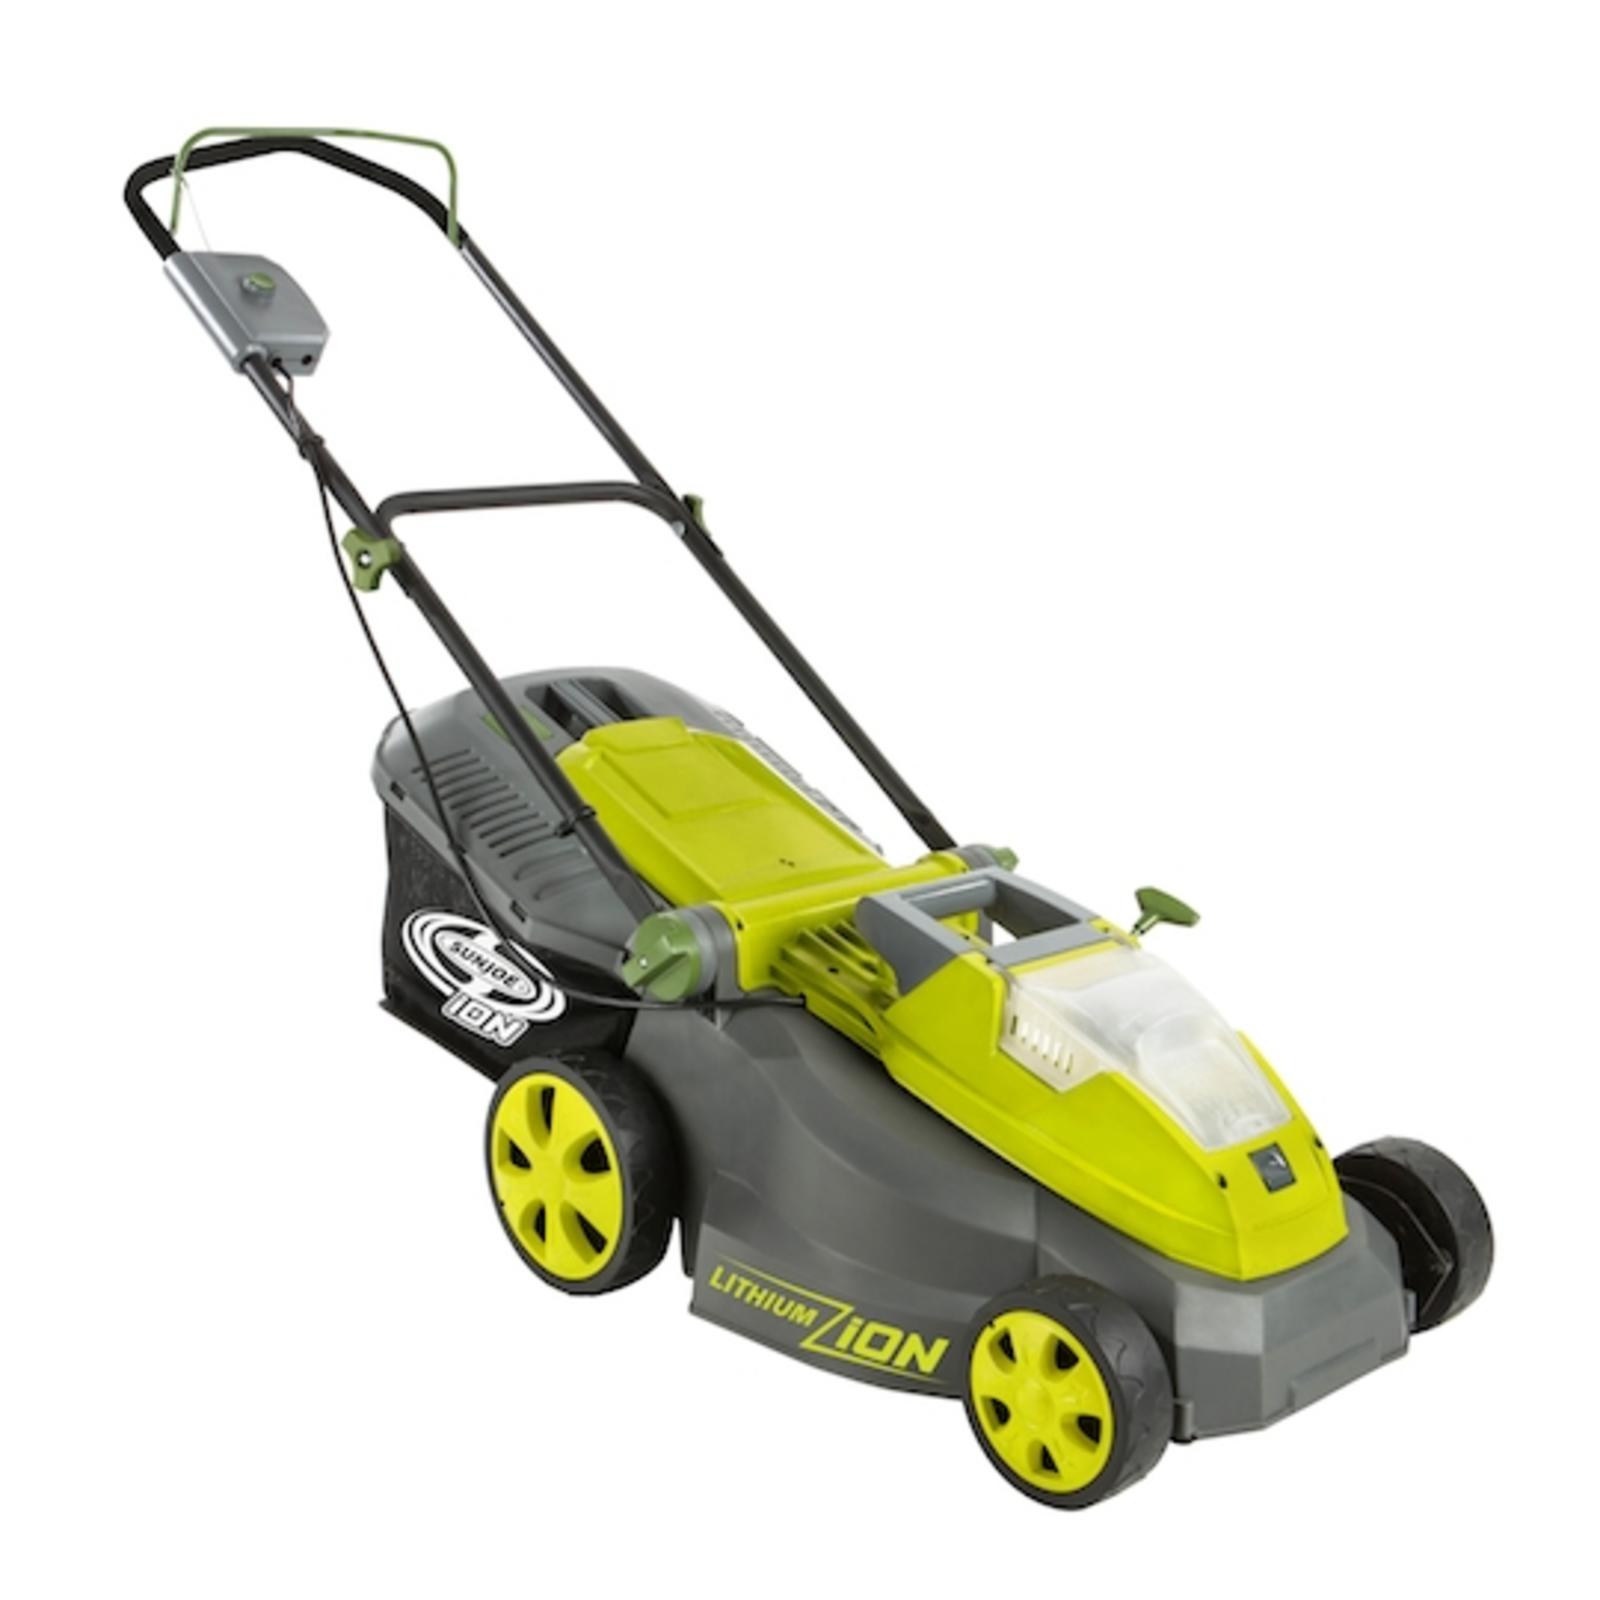 Sun Joe iON16LM 16" 40V Electric Push Lawn Mower with Brushless Motor